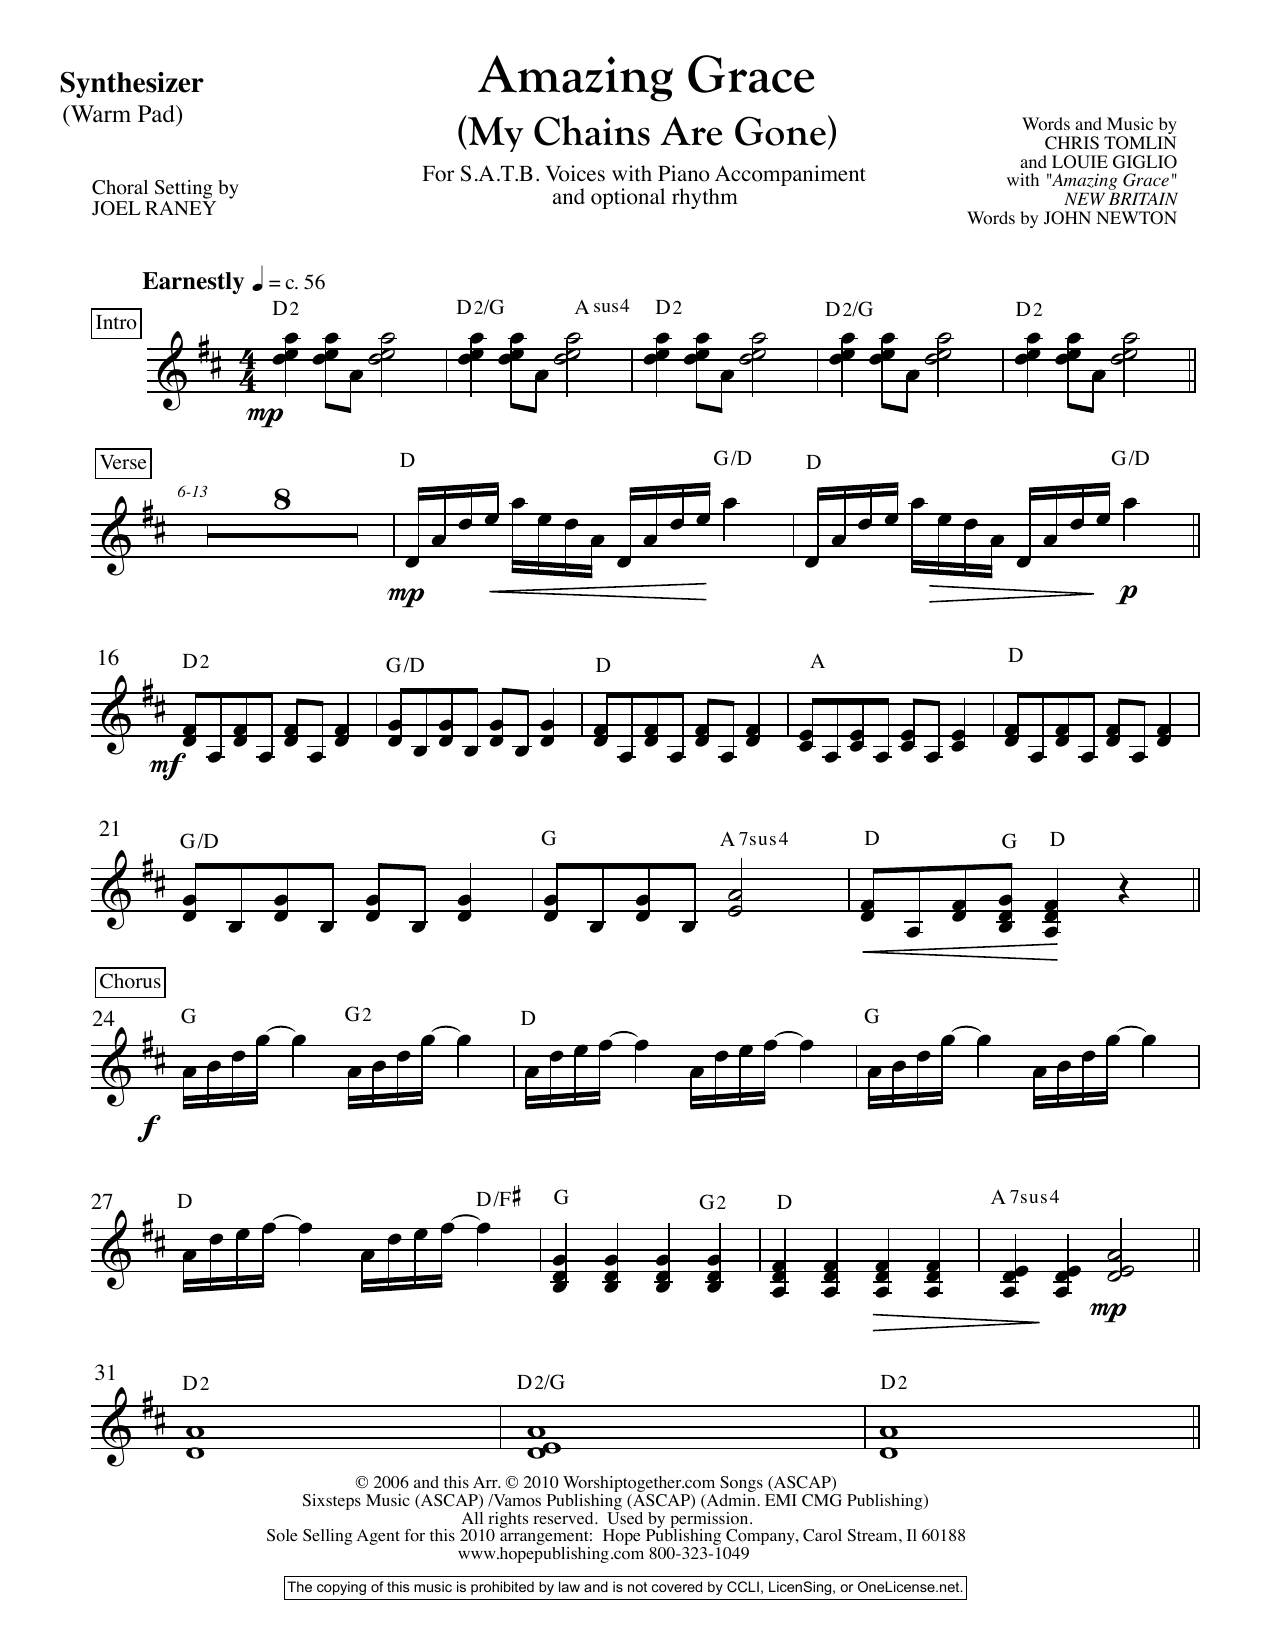 Download Joel Raney Amazing Grace (My Chains Are Gone) - Sy Sheet Music